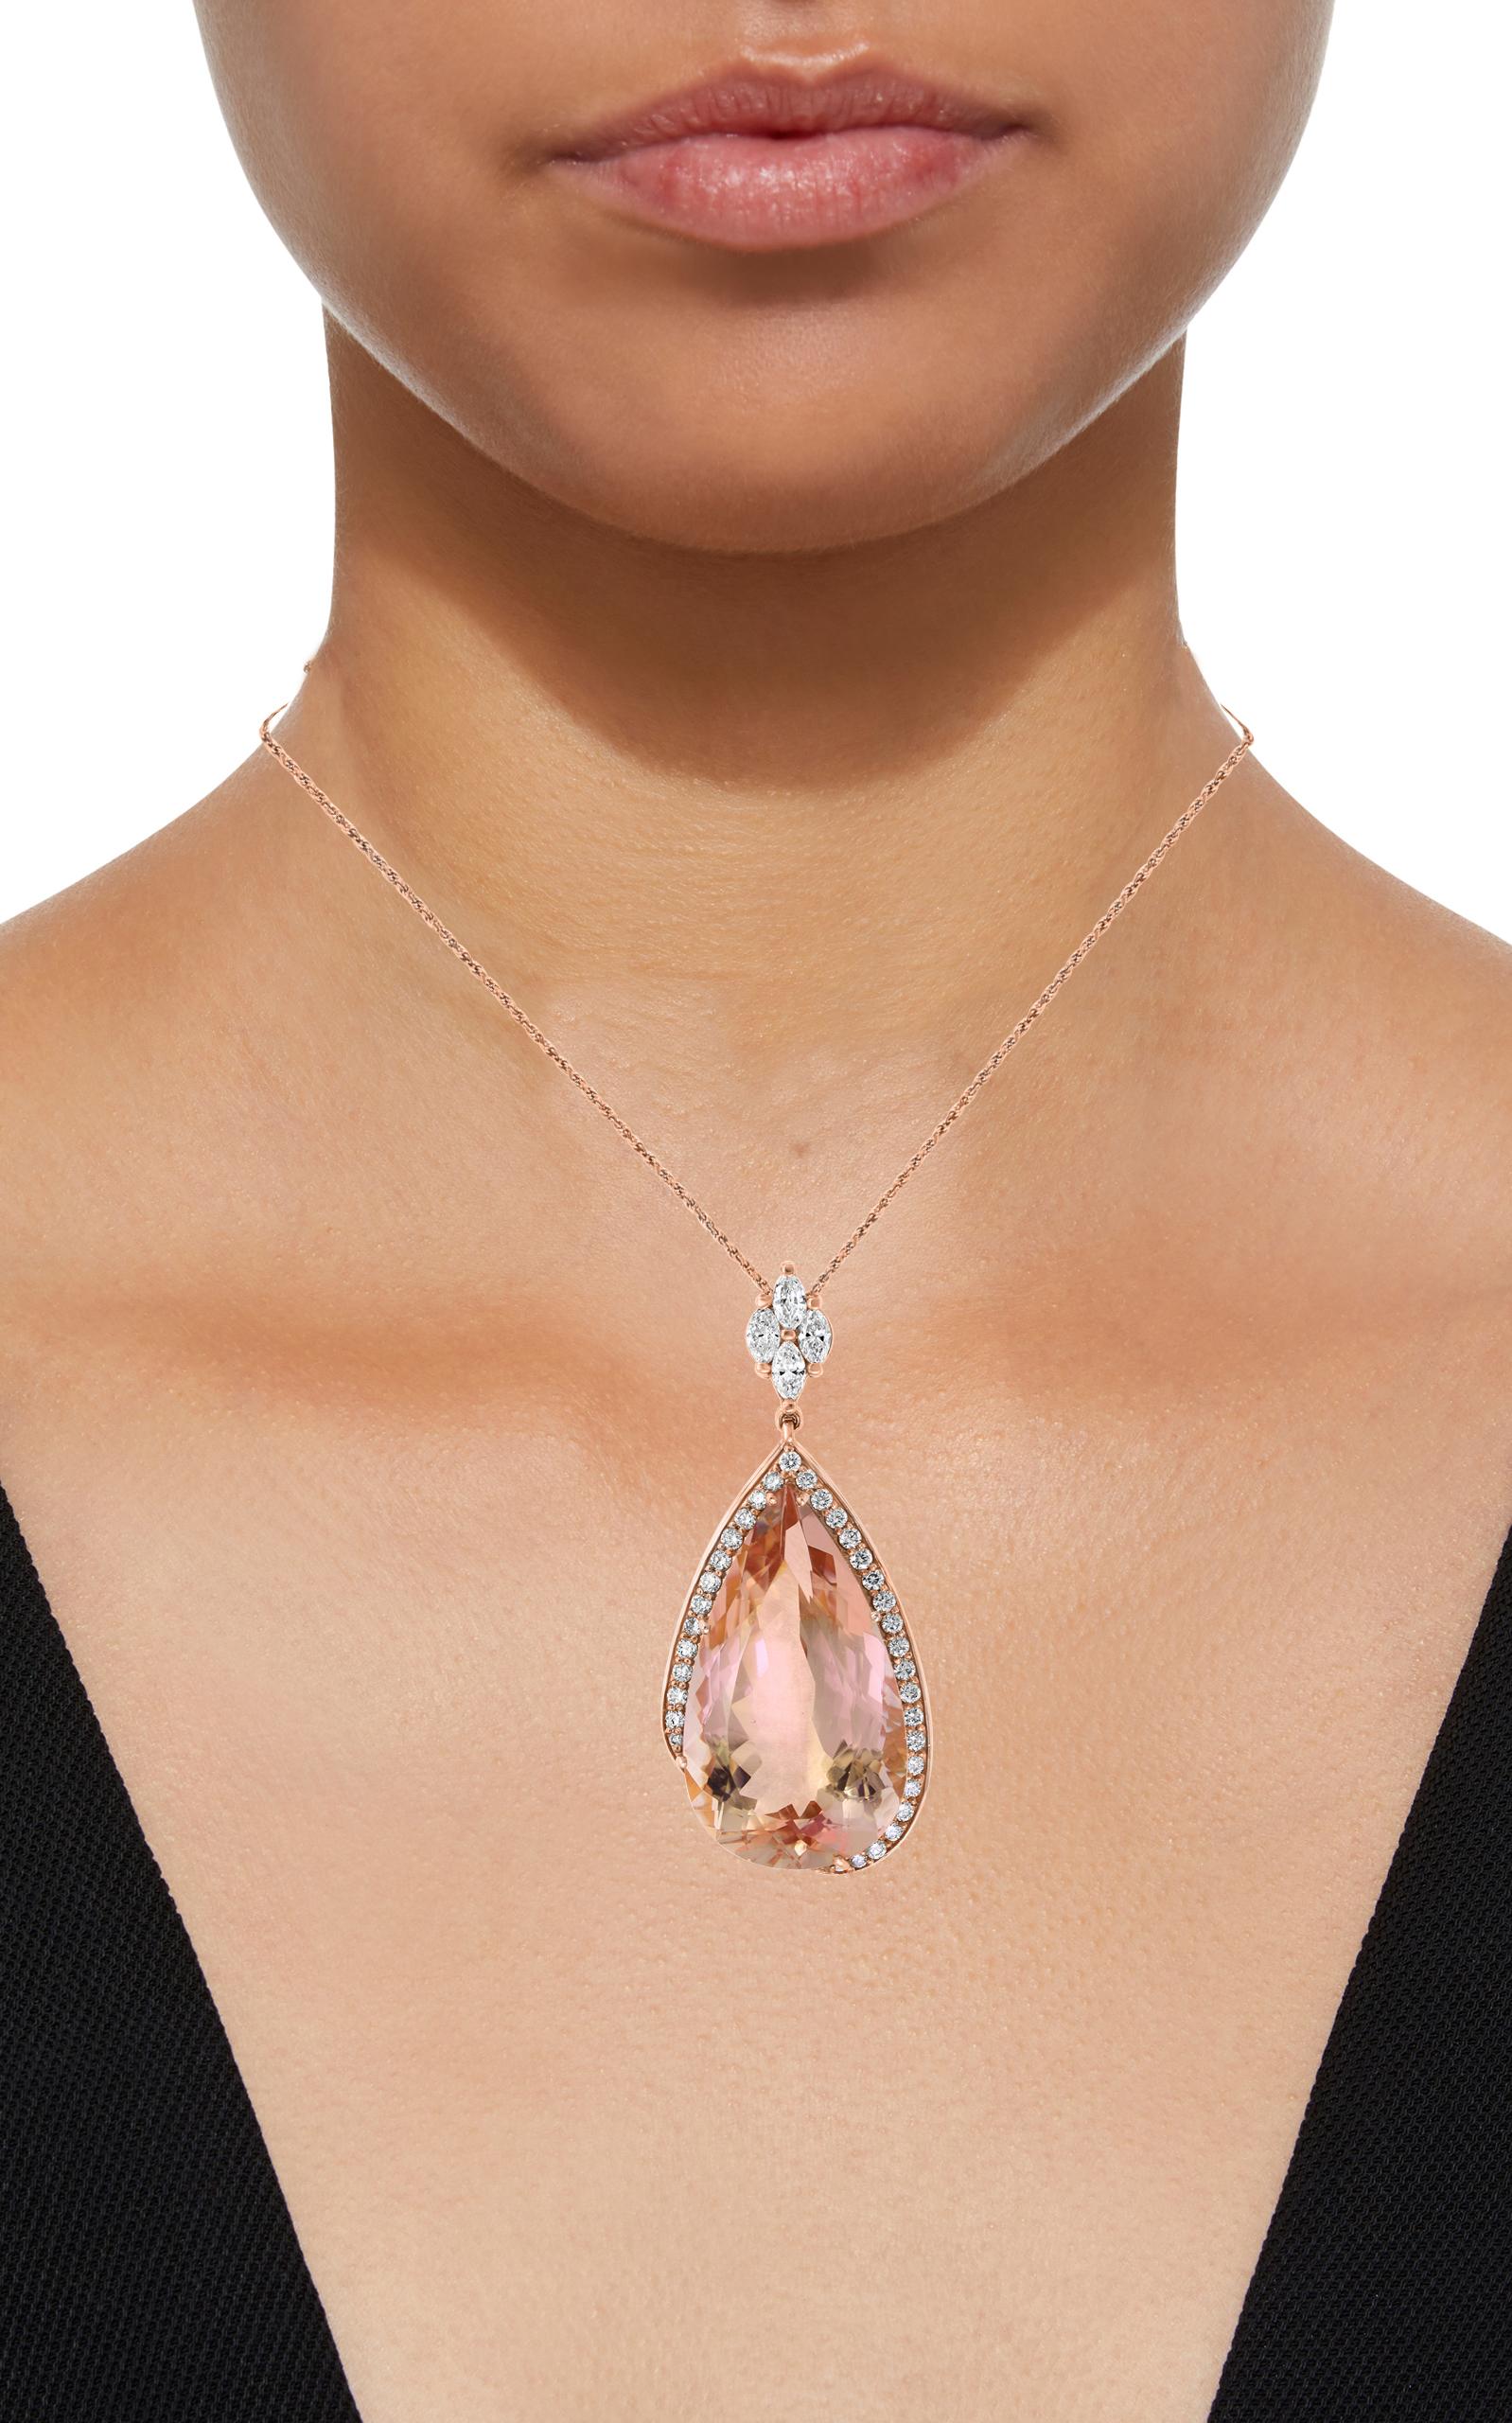 200 Carat Natural Morganite and Diamond Cocktail Earring and Pendant Set 18K PG For Sale 7